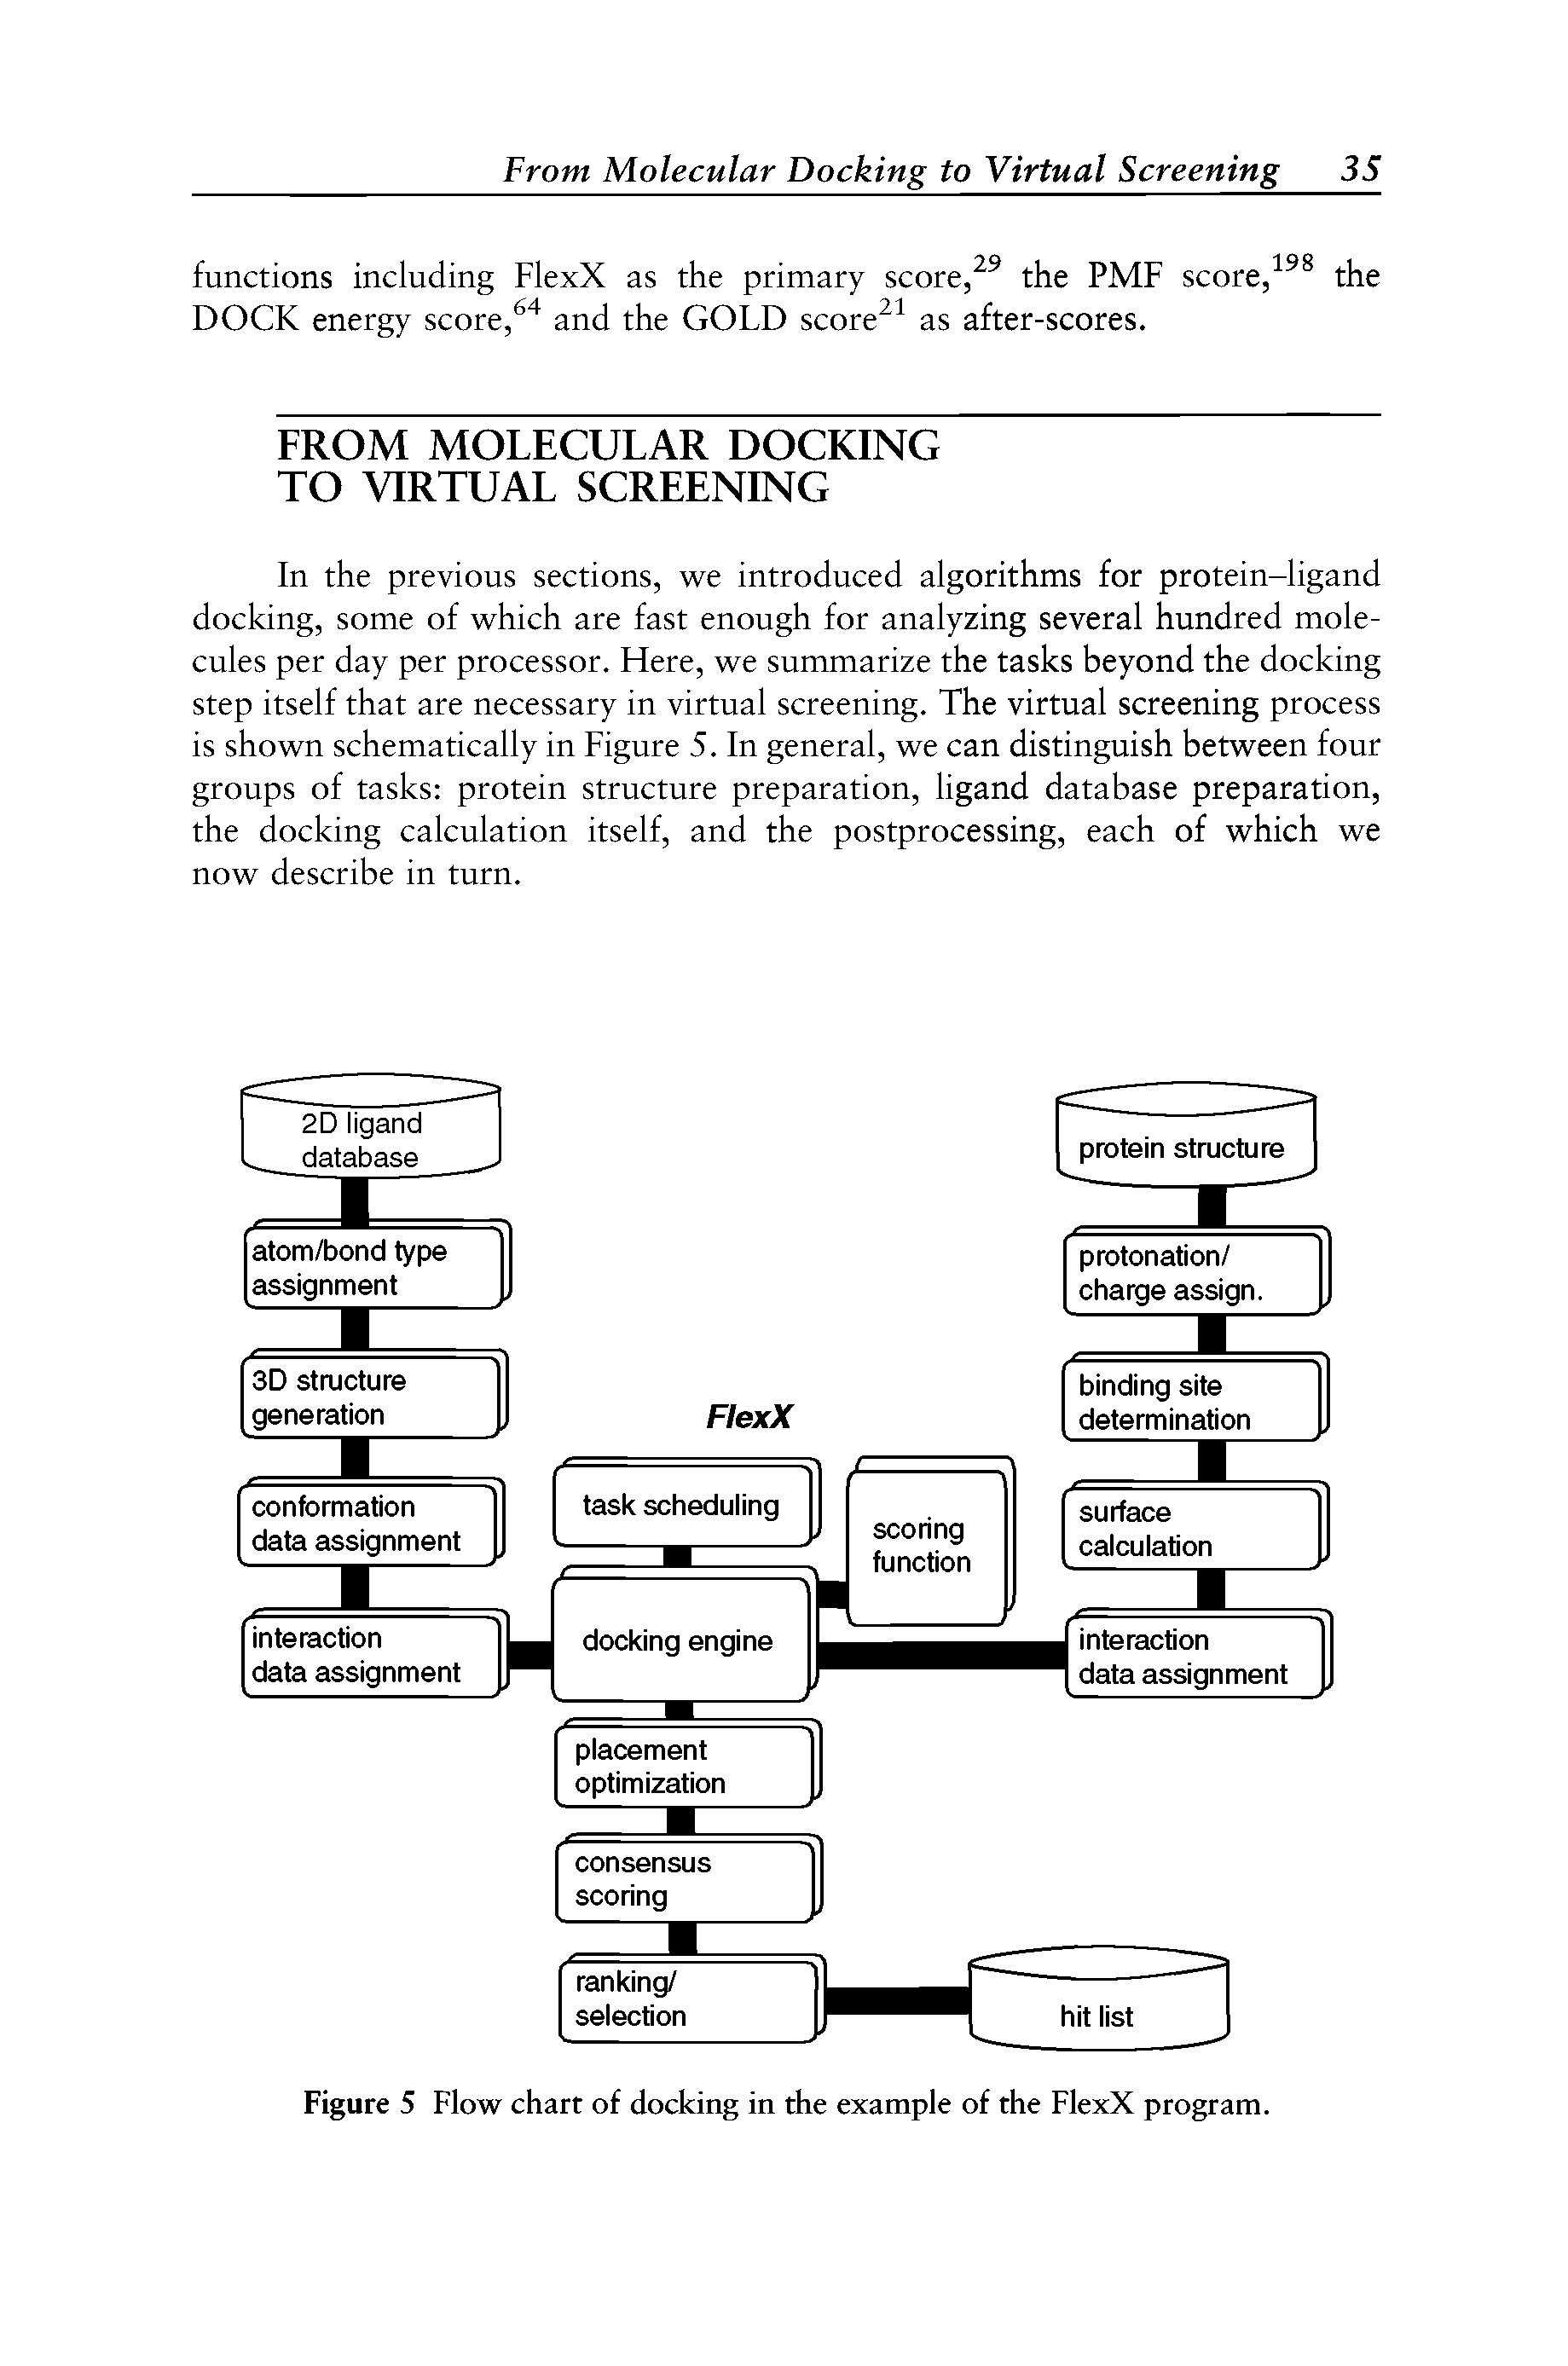 Figure 5 Flow chart of docking in the example of the FlexX program.